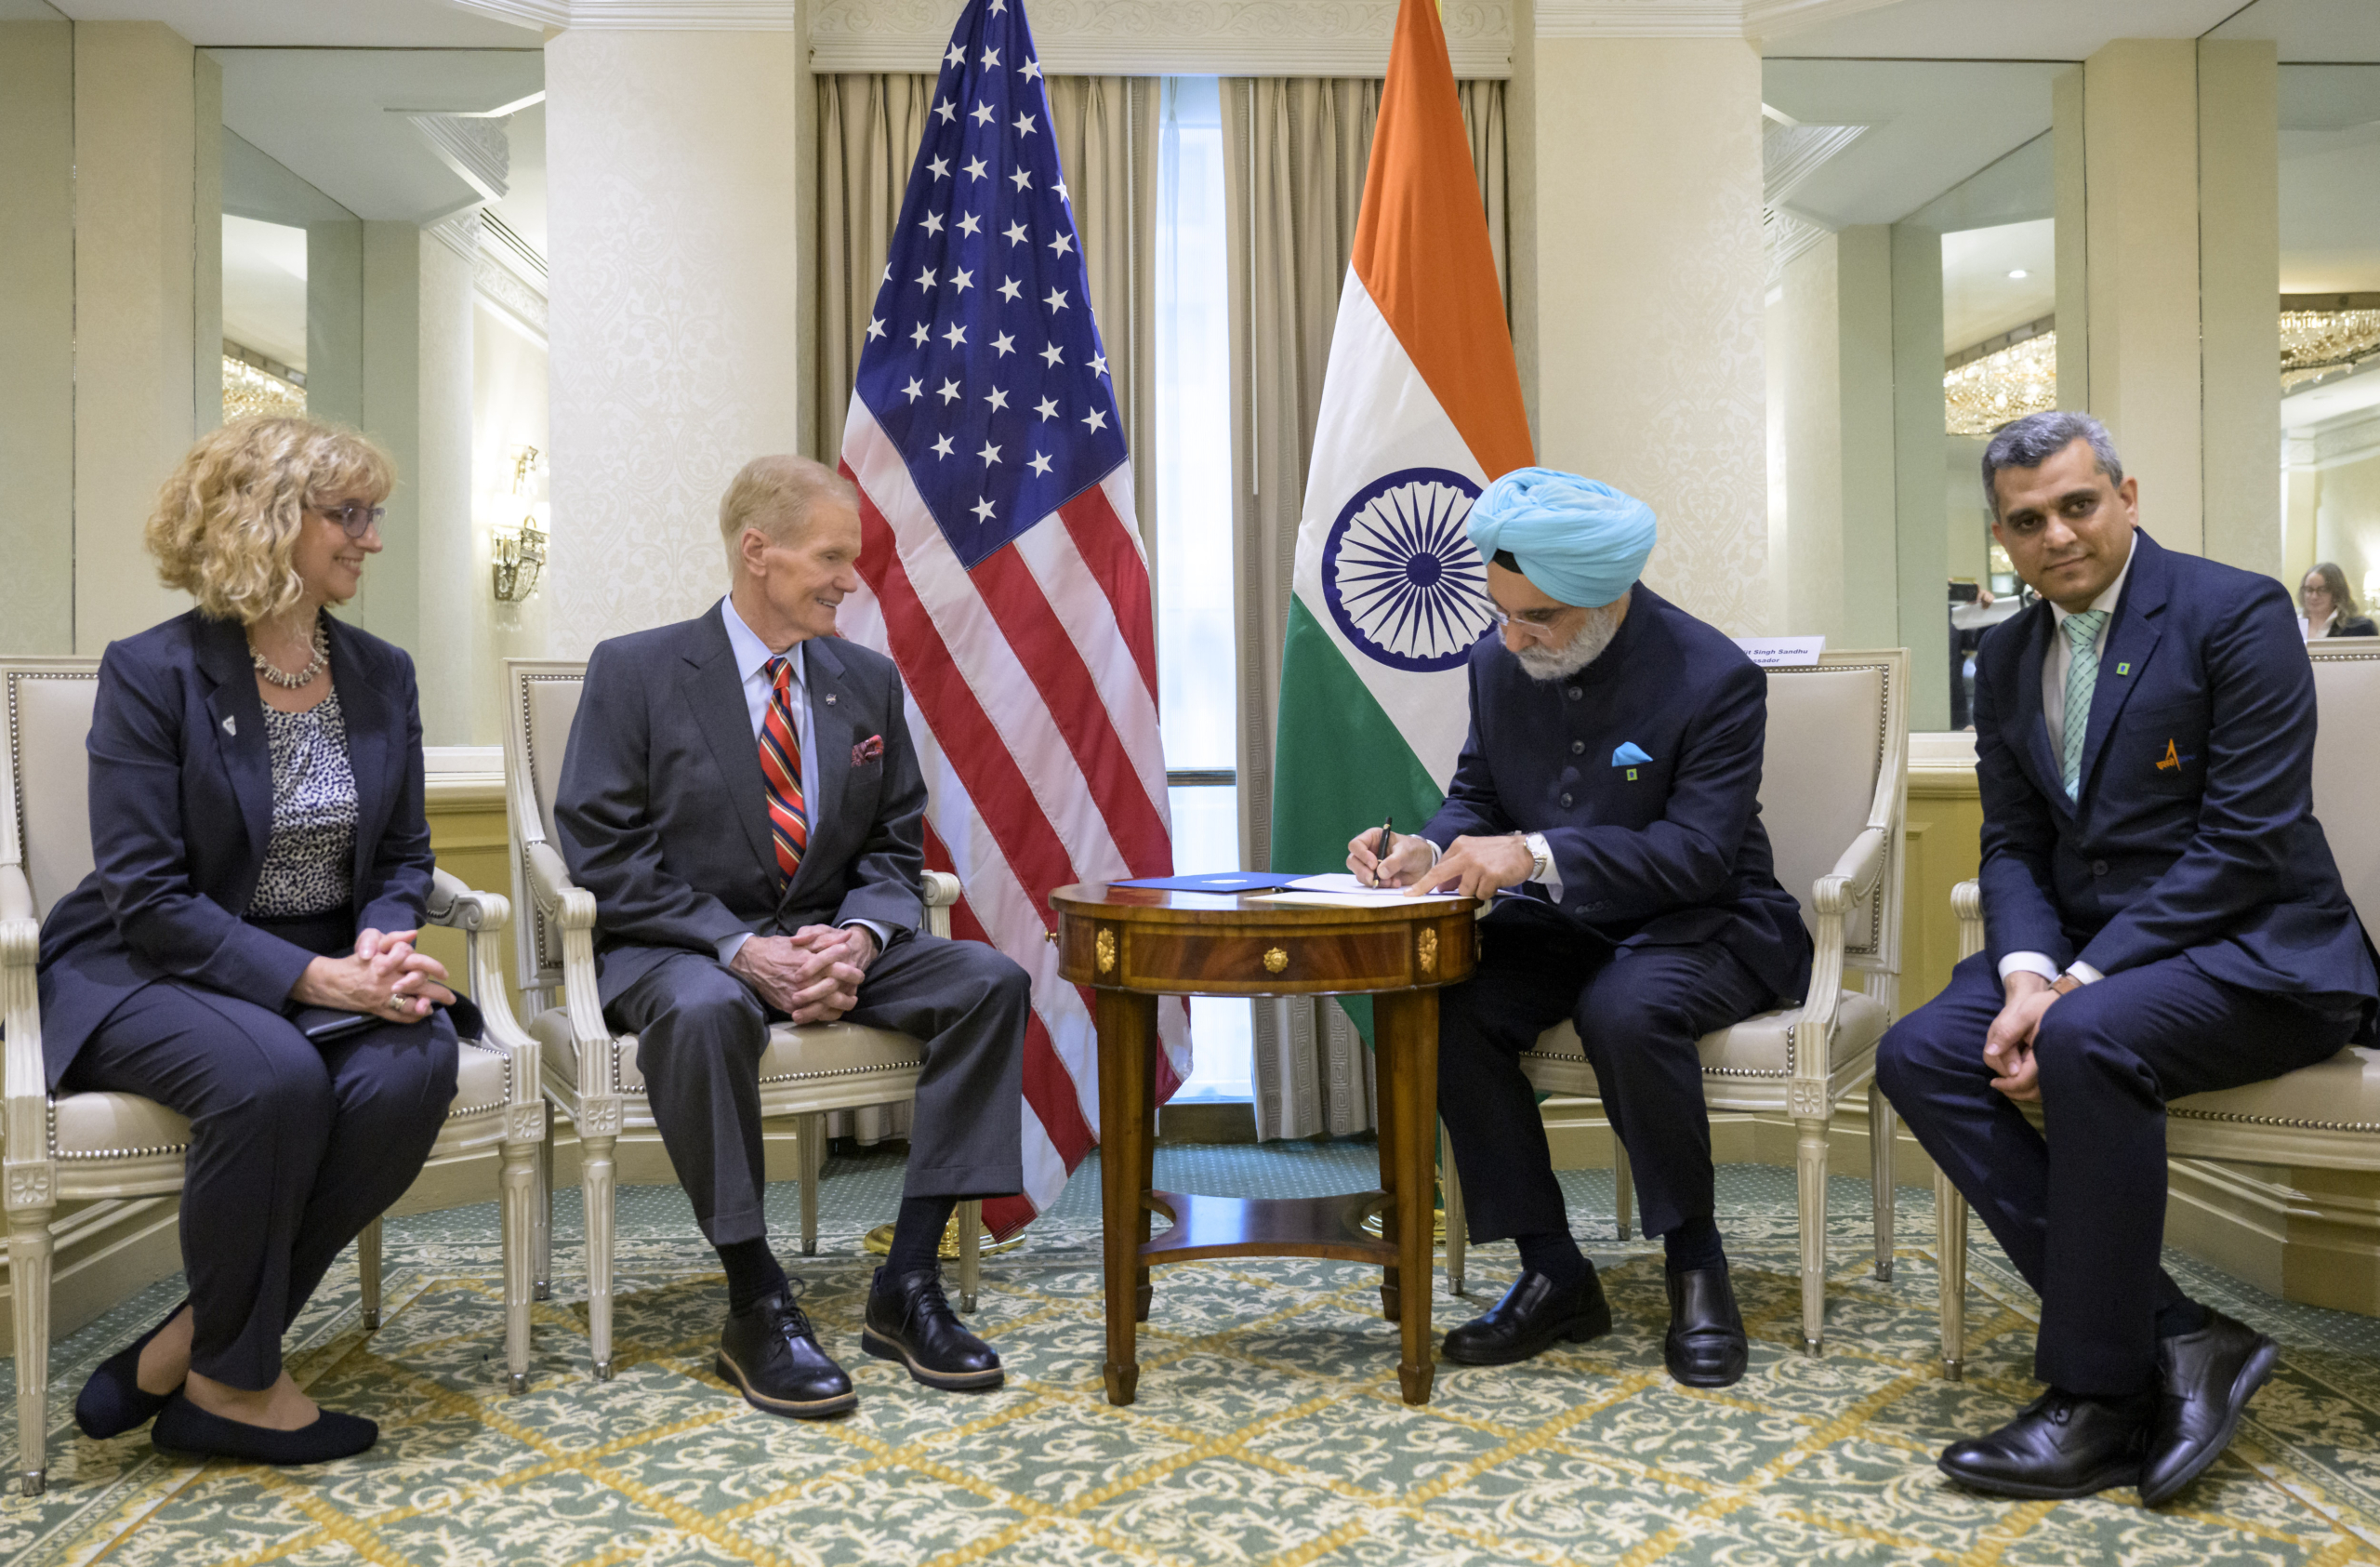 Four people sit facing forward, not facing each other.  They all wear suits.  A man in a light blue turban signs a document on a small table in front of him.  Two flags stand behind two people in the middle.